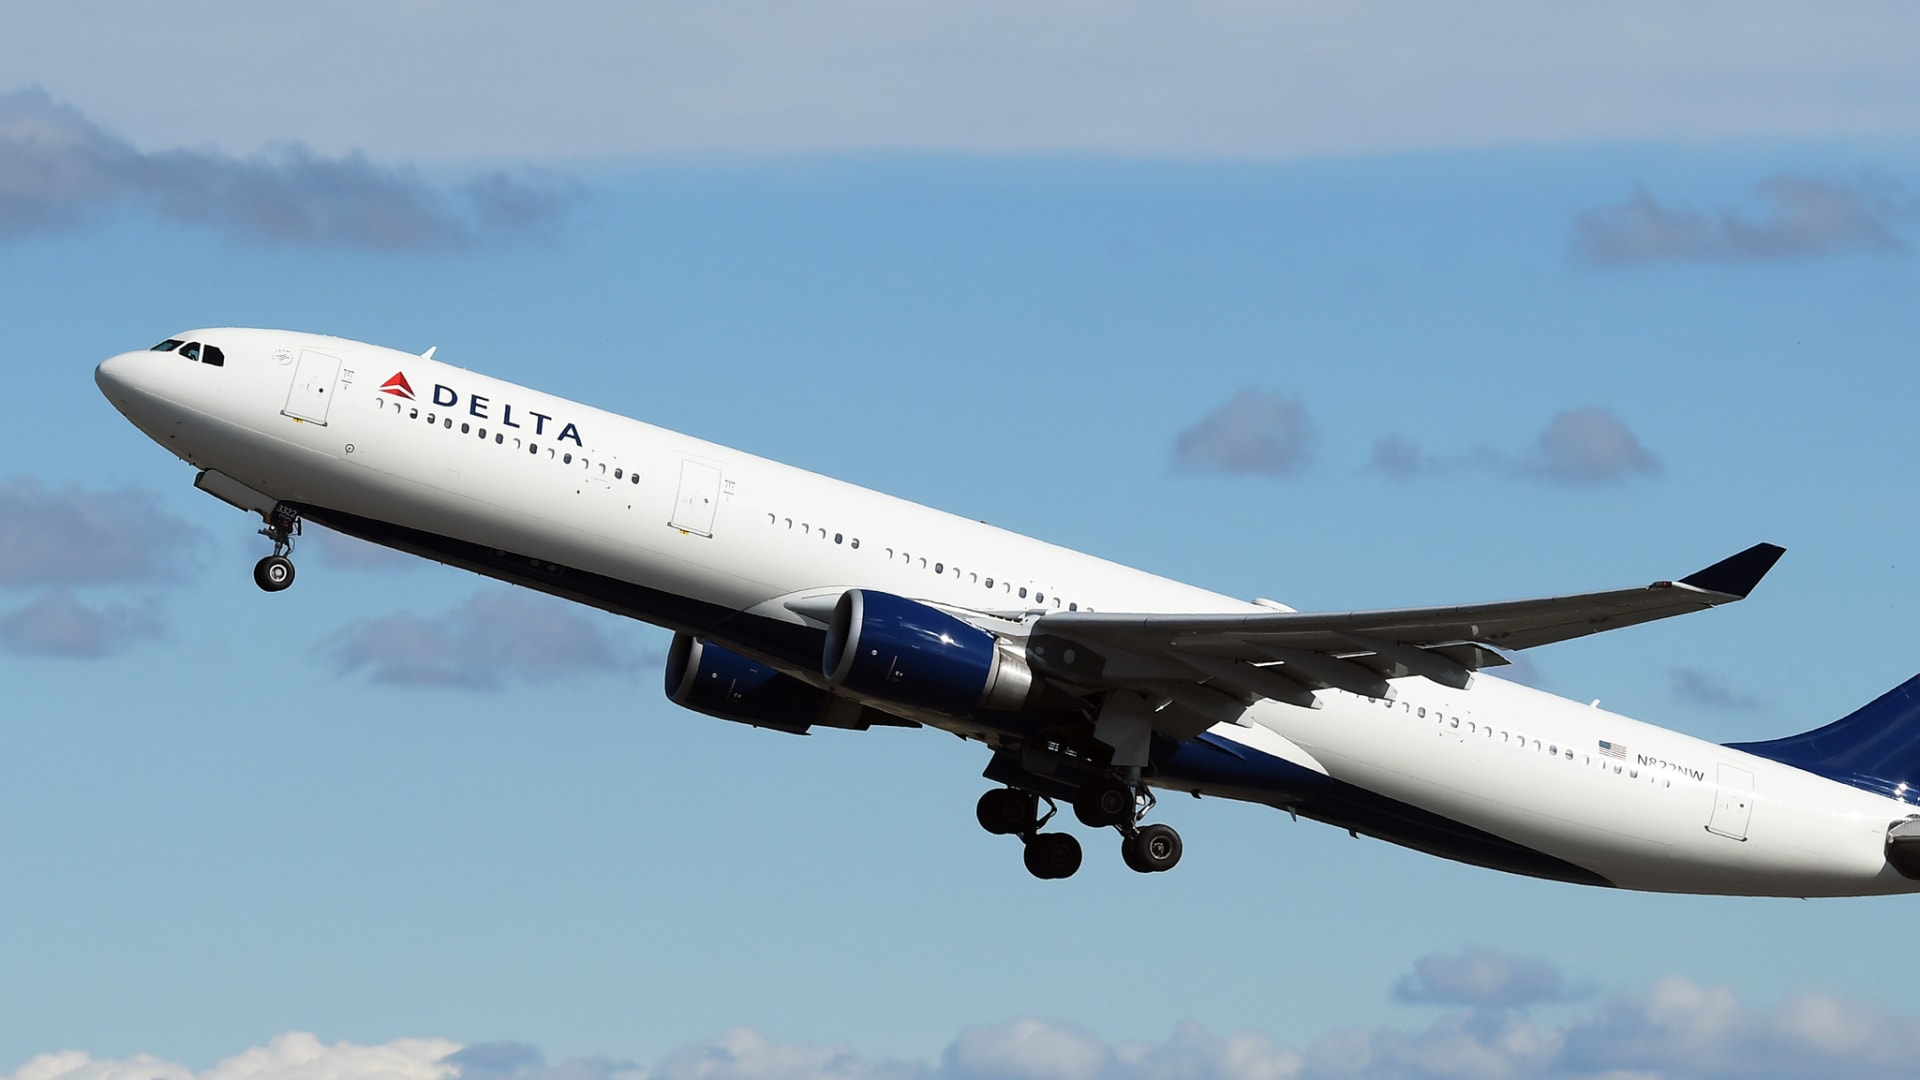 Delta Air Lines Just Shared a Surprising New Insight: Passengers Are Already Making Big Changes